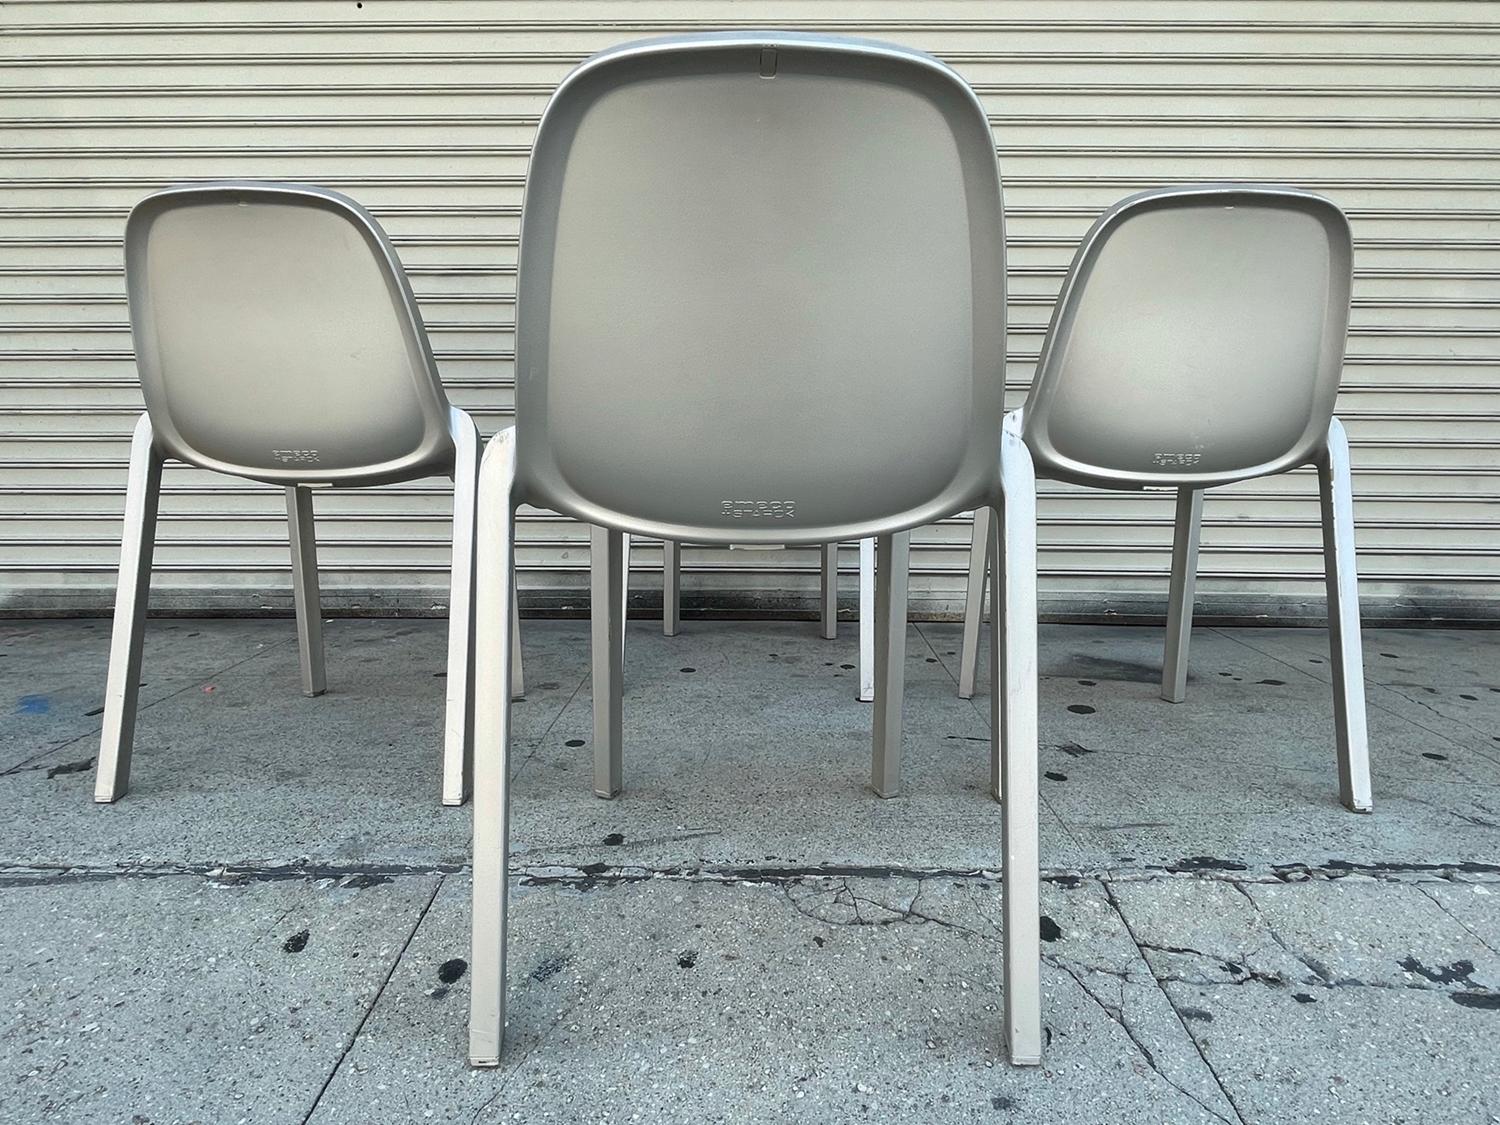 Plastic Set of 4 Broom Chairs by Philippe Starck for Emeco